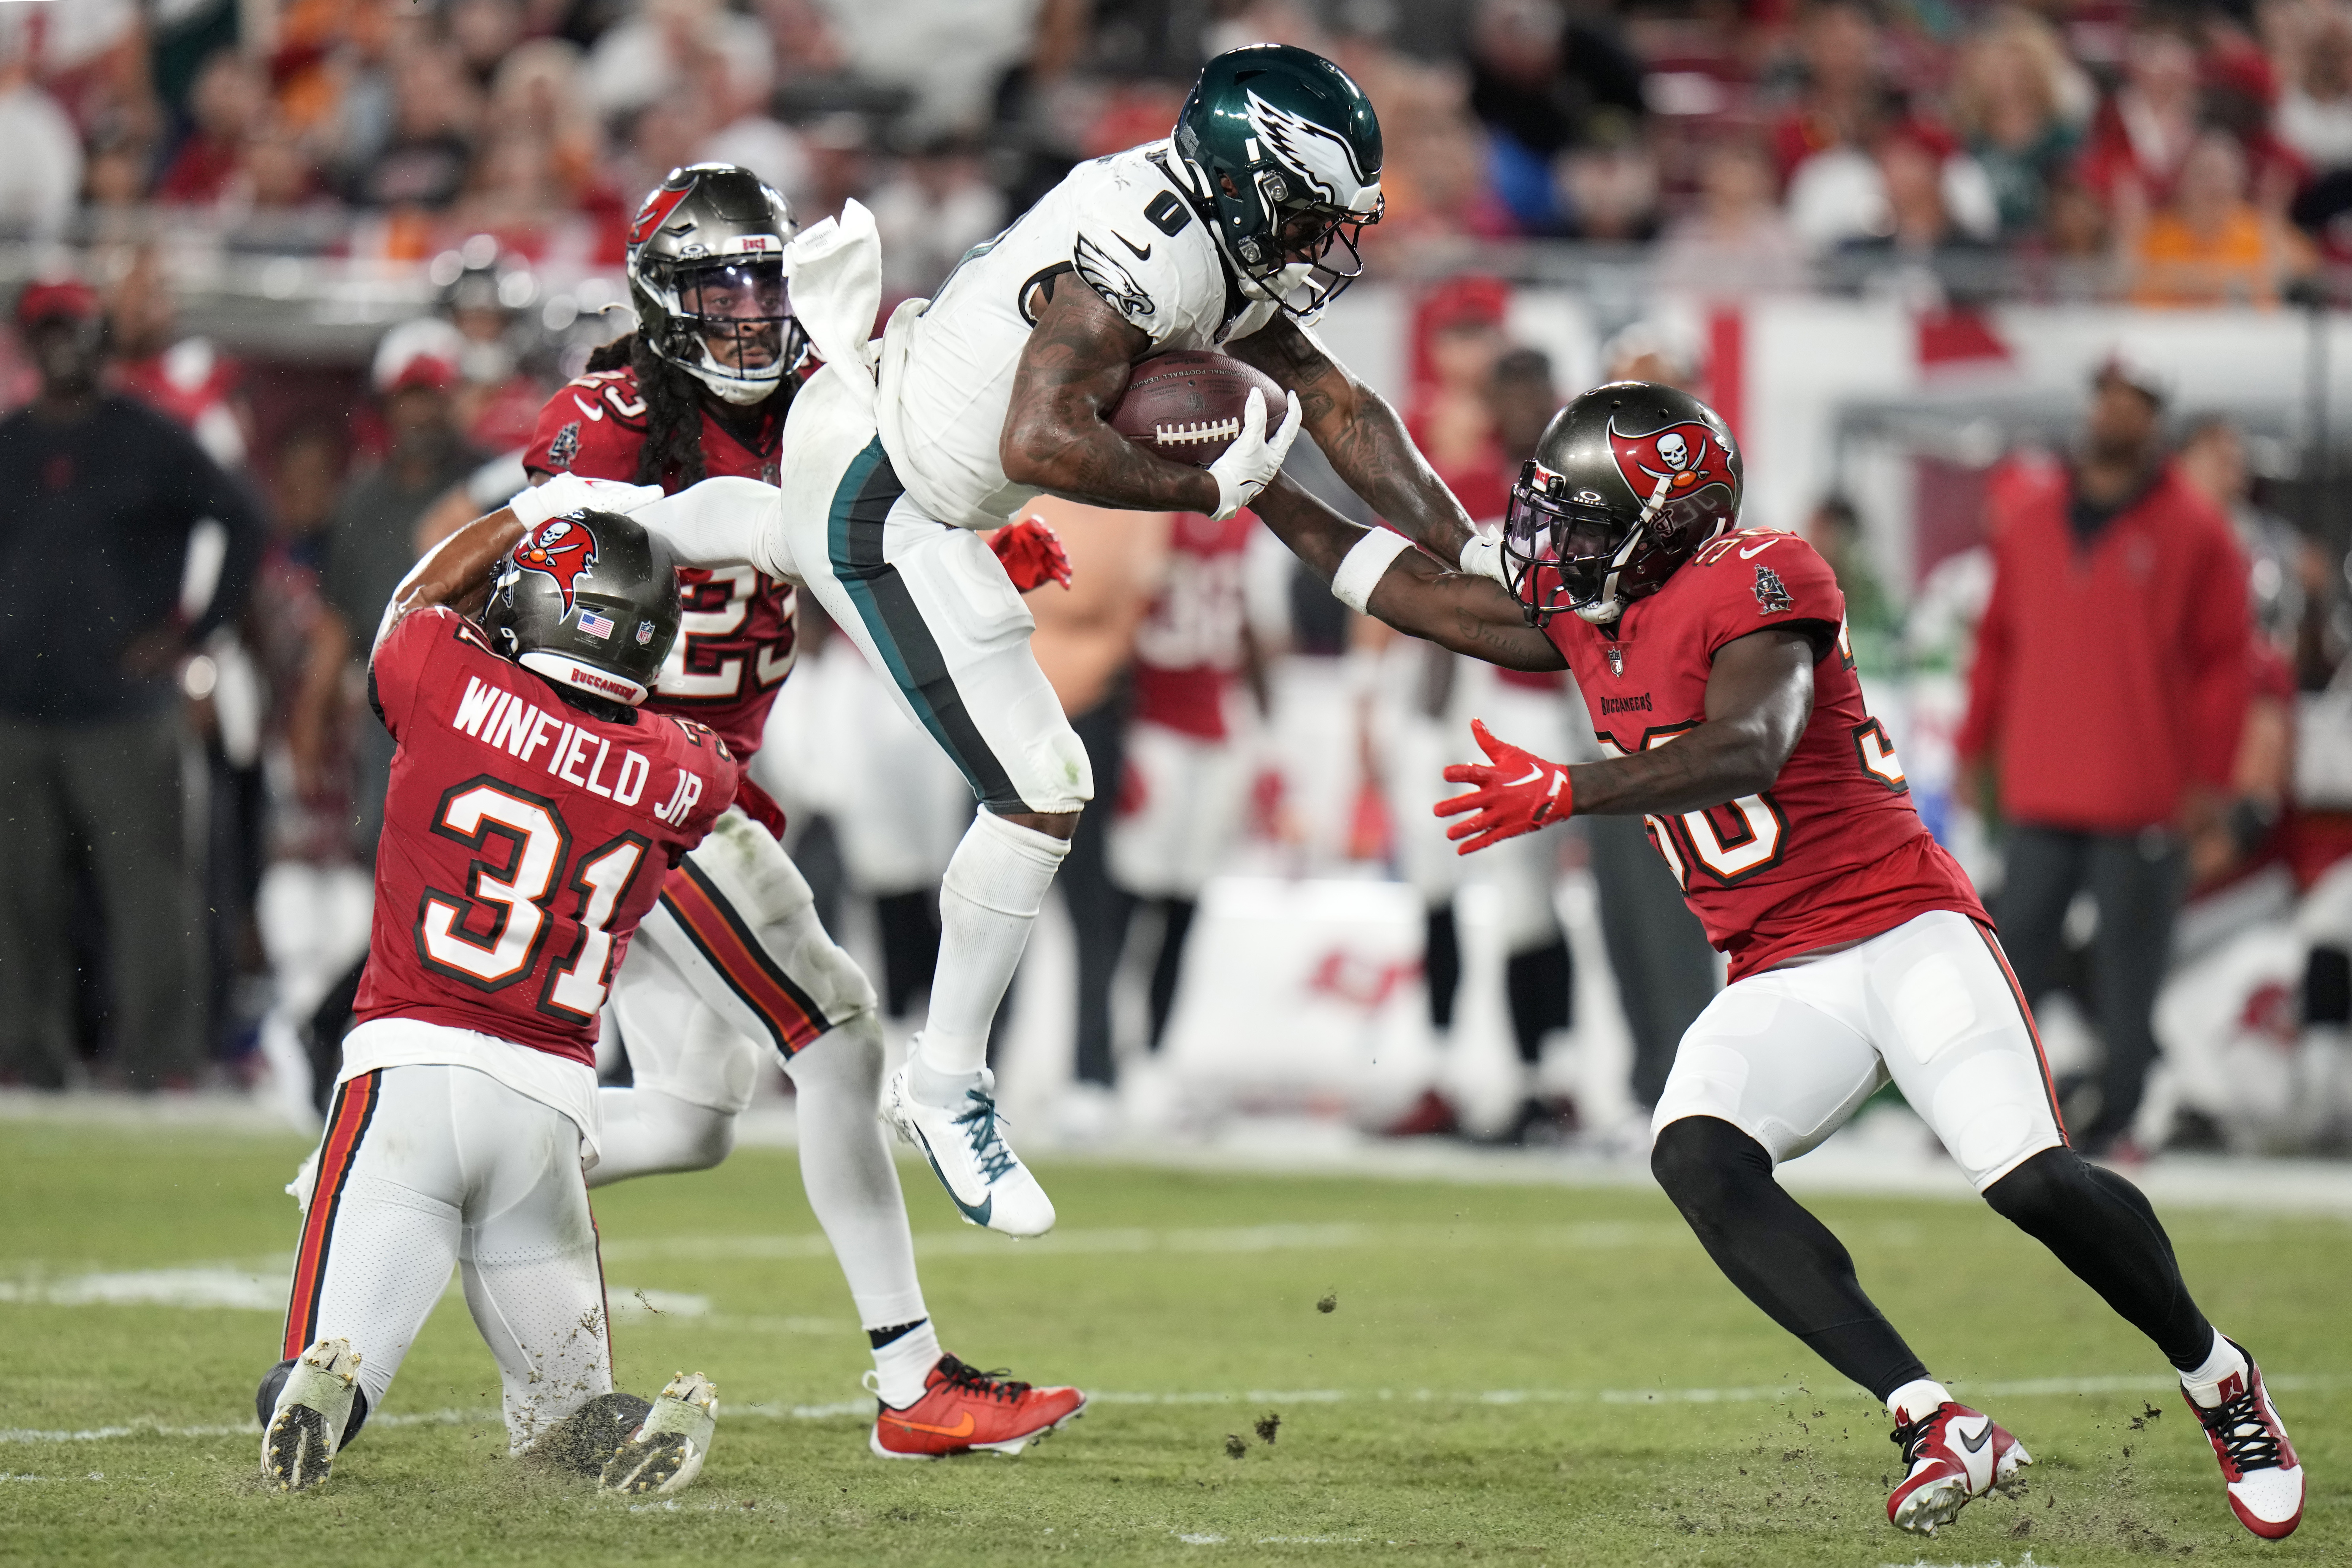 Eagles defense gets its turn to shine, as Philly shuts down Buccaneers in  easy win